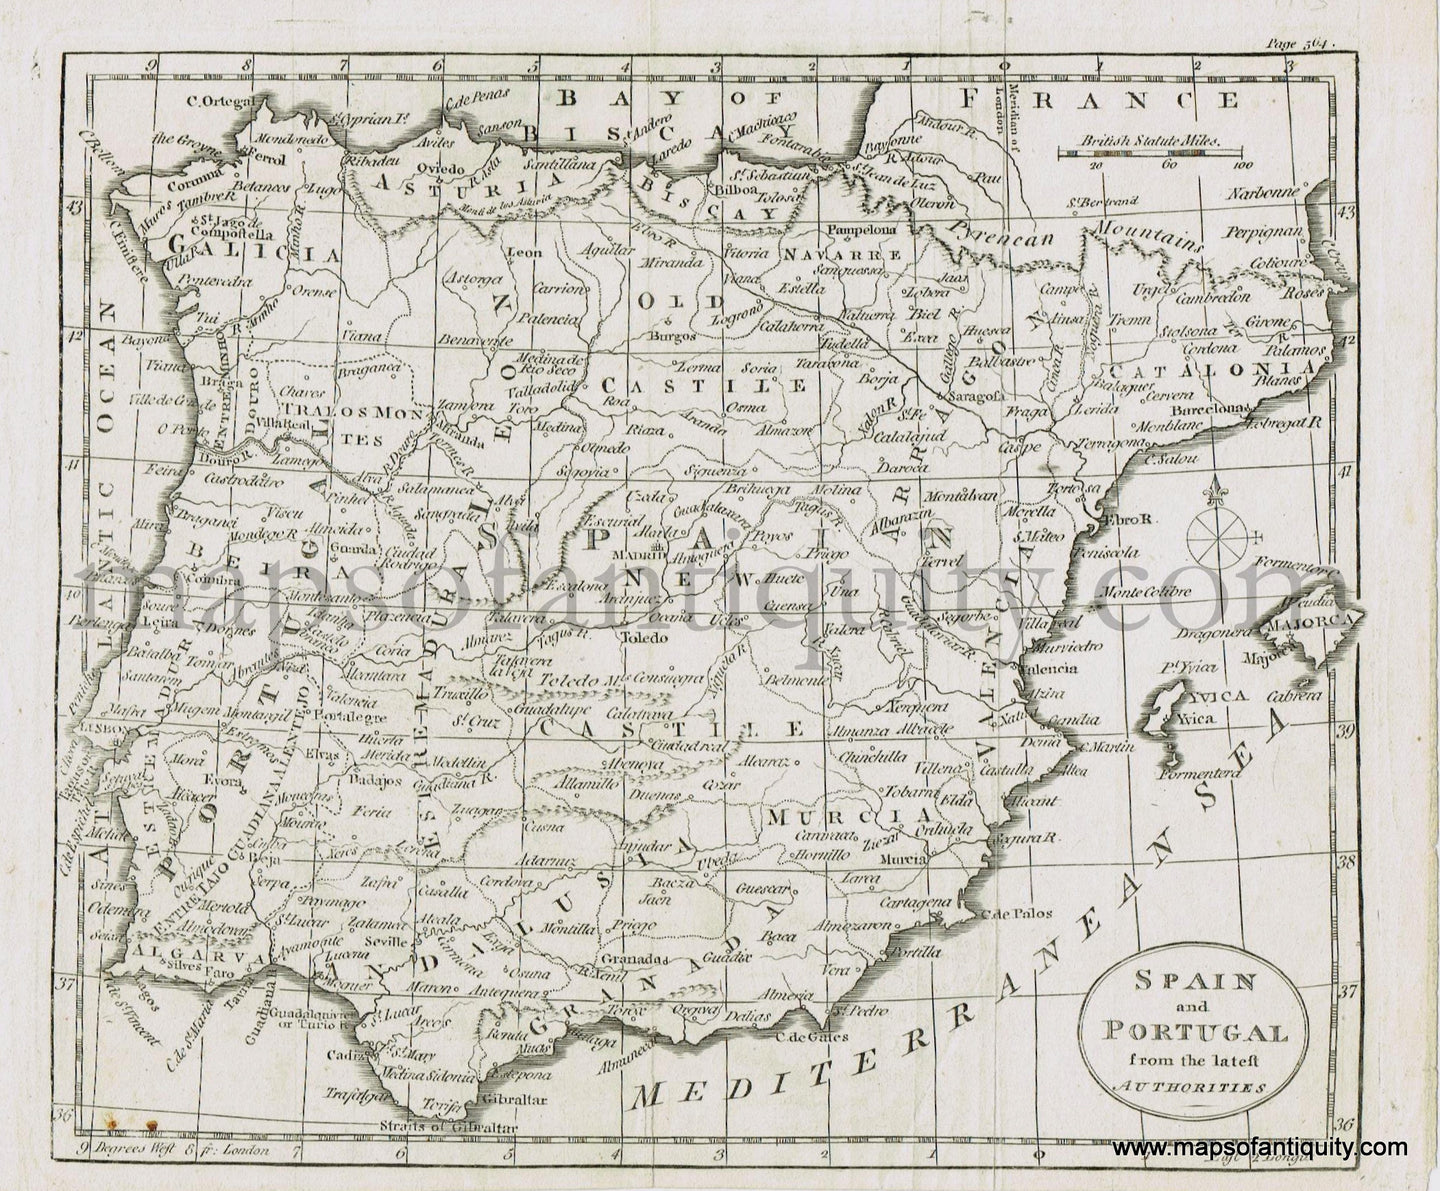 Antique-Black-and-White-Map-Europe-Spain-and-Portugal-from-the-latest-Authorities-1793-unknown-Spain-&-Portugal-1700s-18th-century-Maps-of-Antiquity